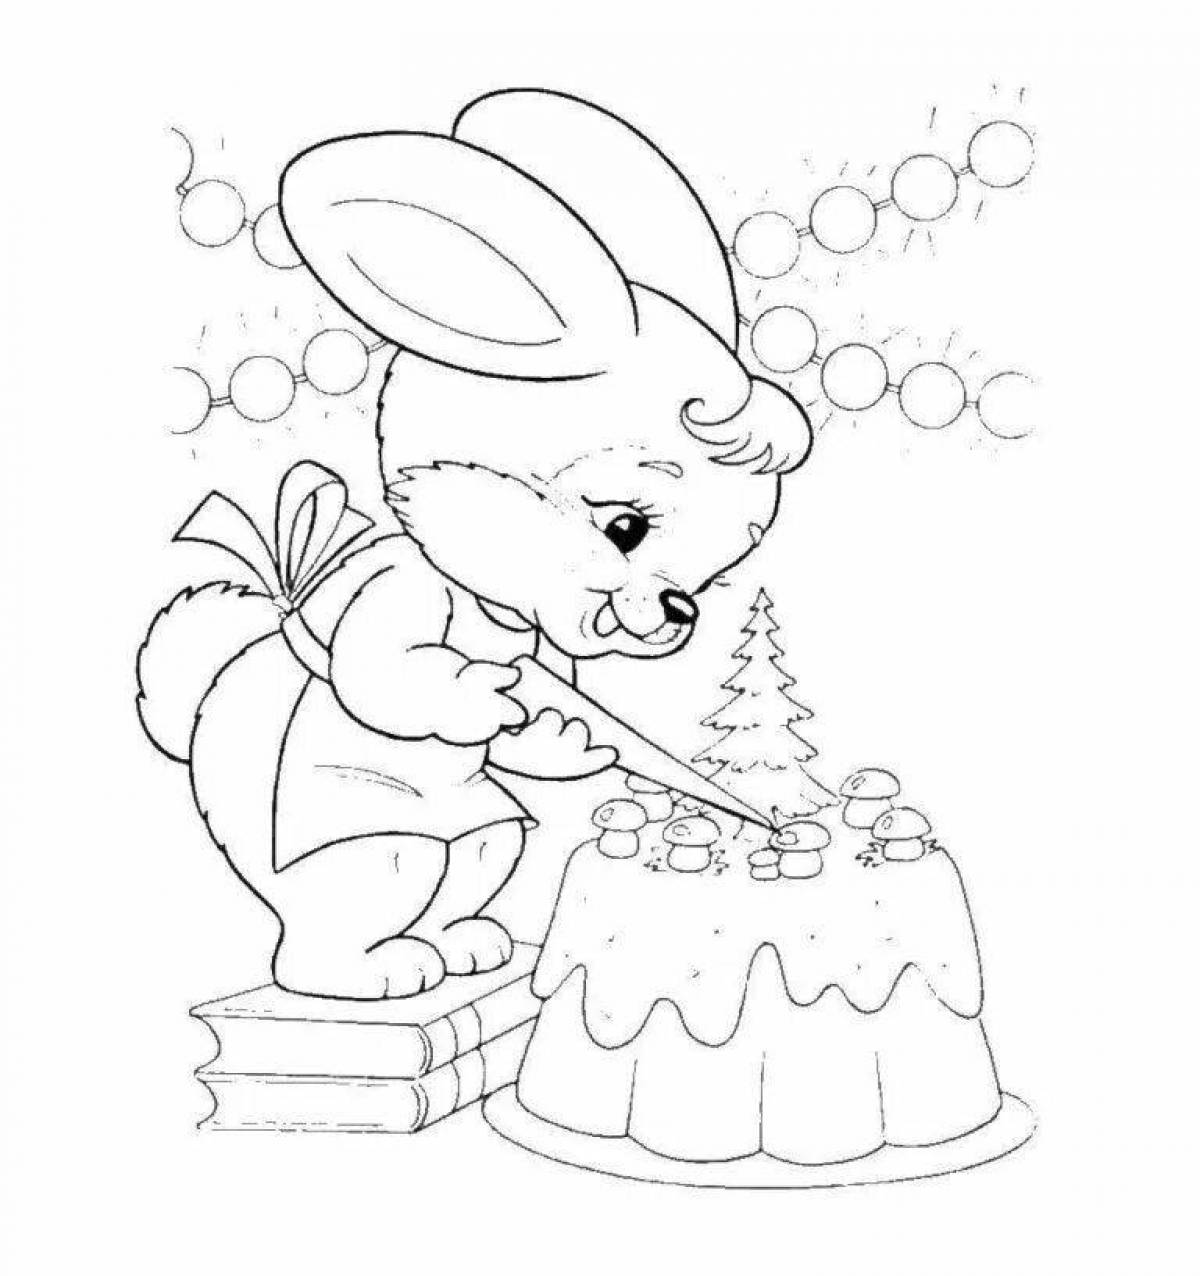 Coloring book jubilant hare for the new year